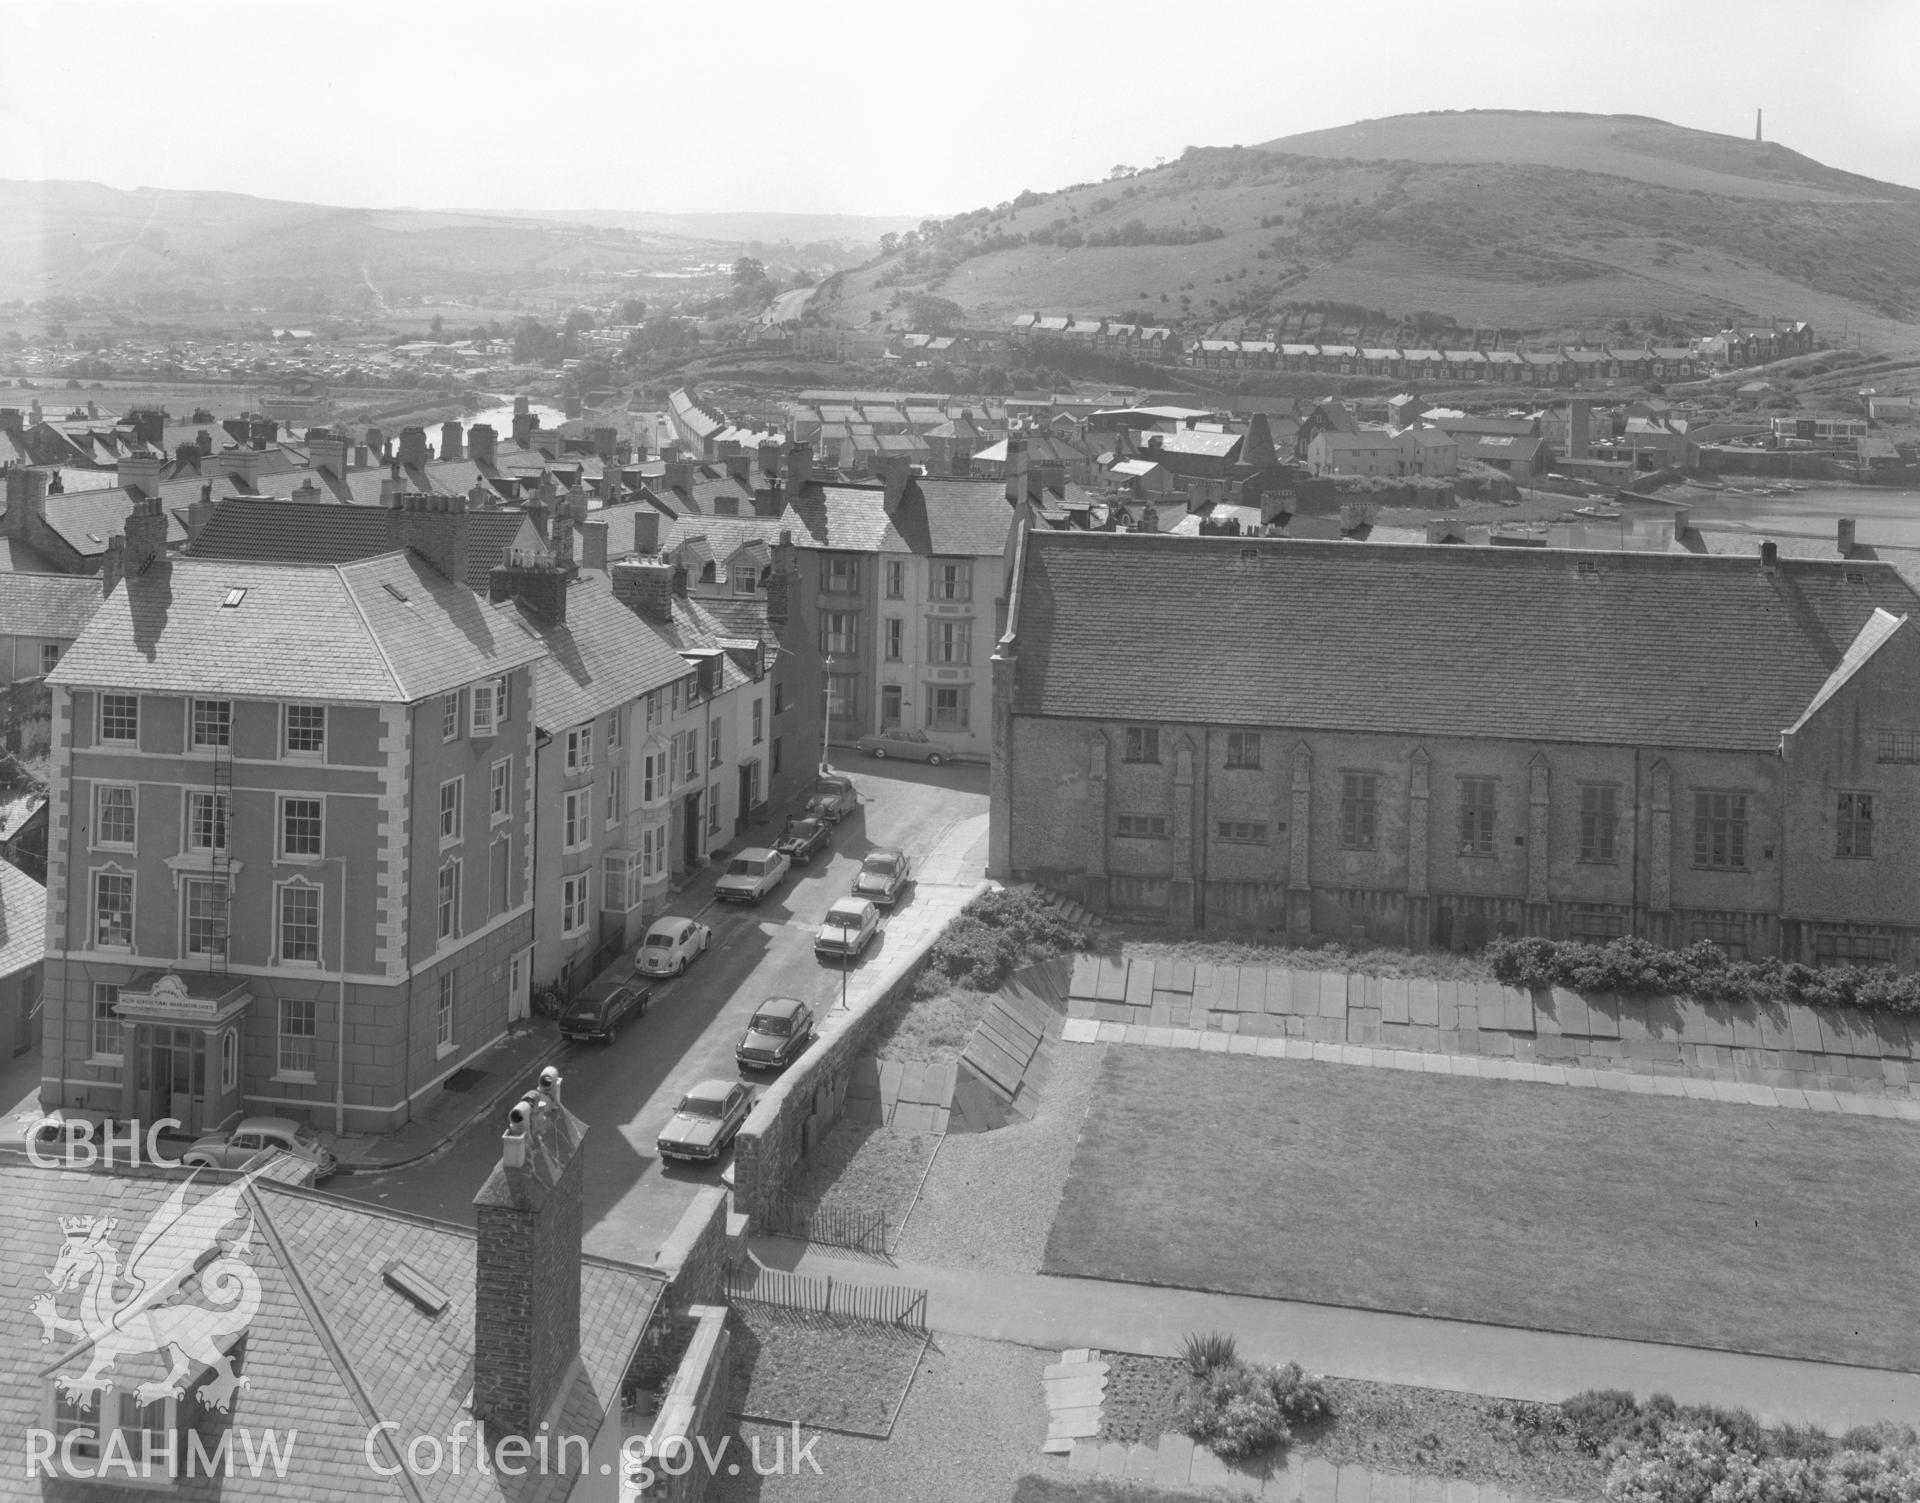 Black and white acetate negative showing a view of Aberystwyth.